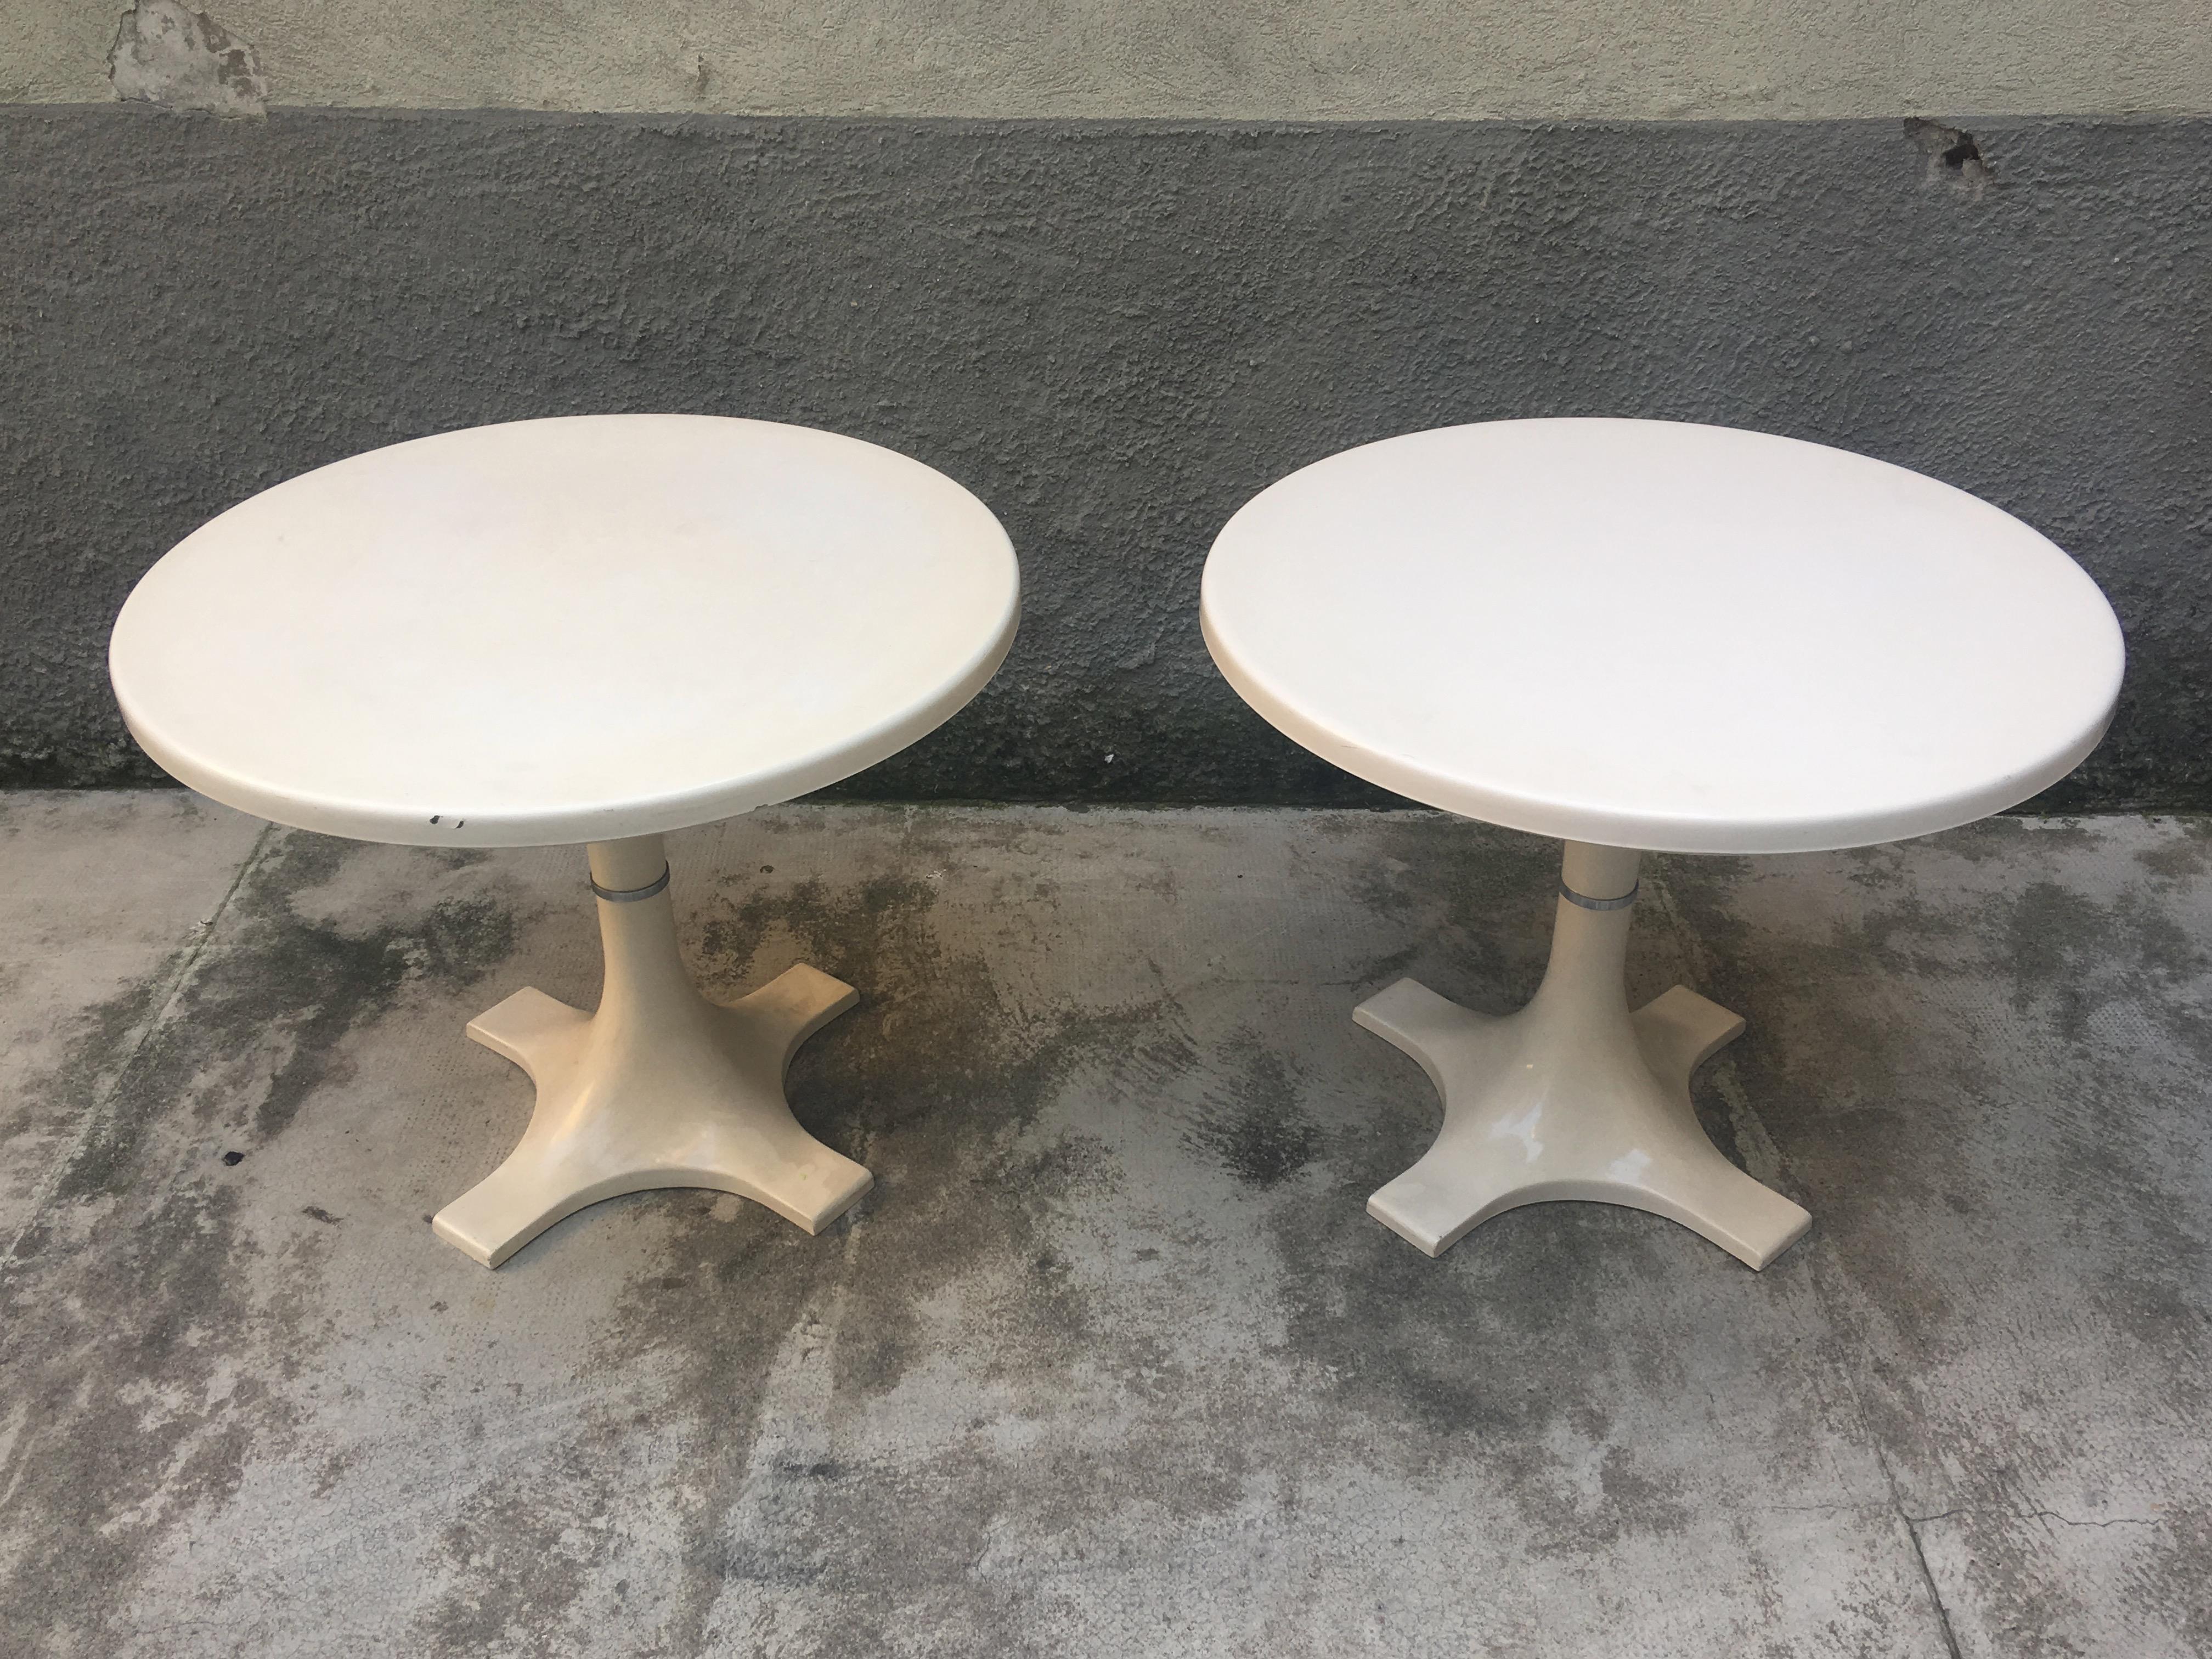 Space Age Dining table - A. Castelli Ferrieri, Ignazio Gardella - Kartell, Italy 1965 For Sale